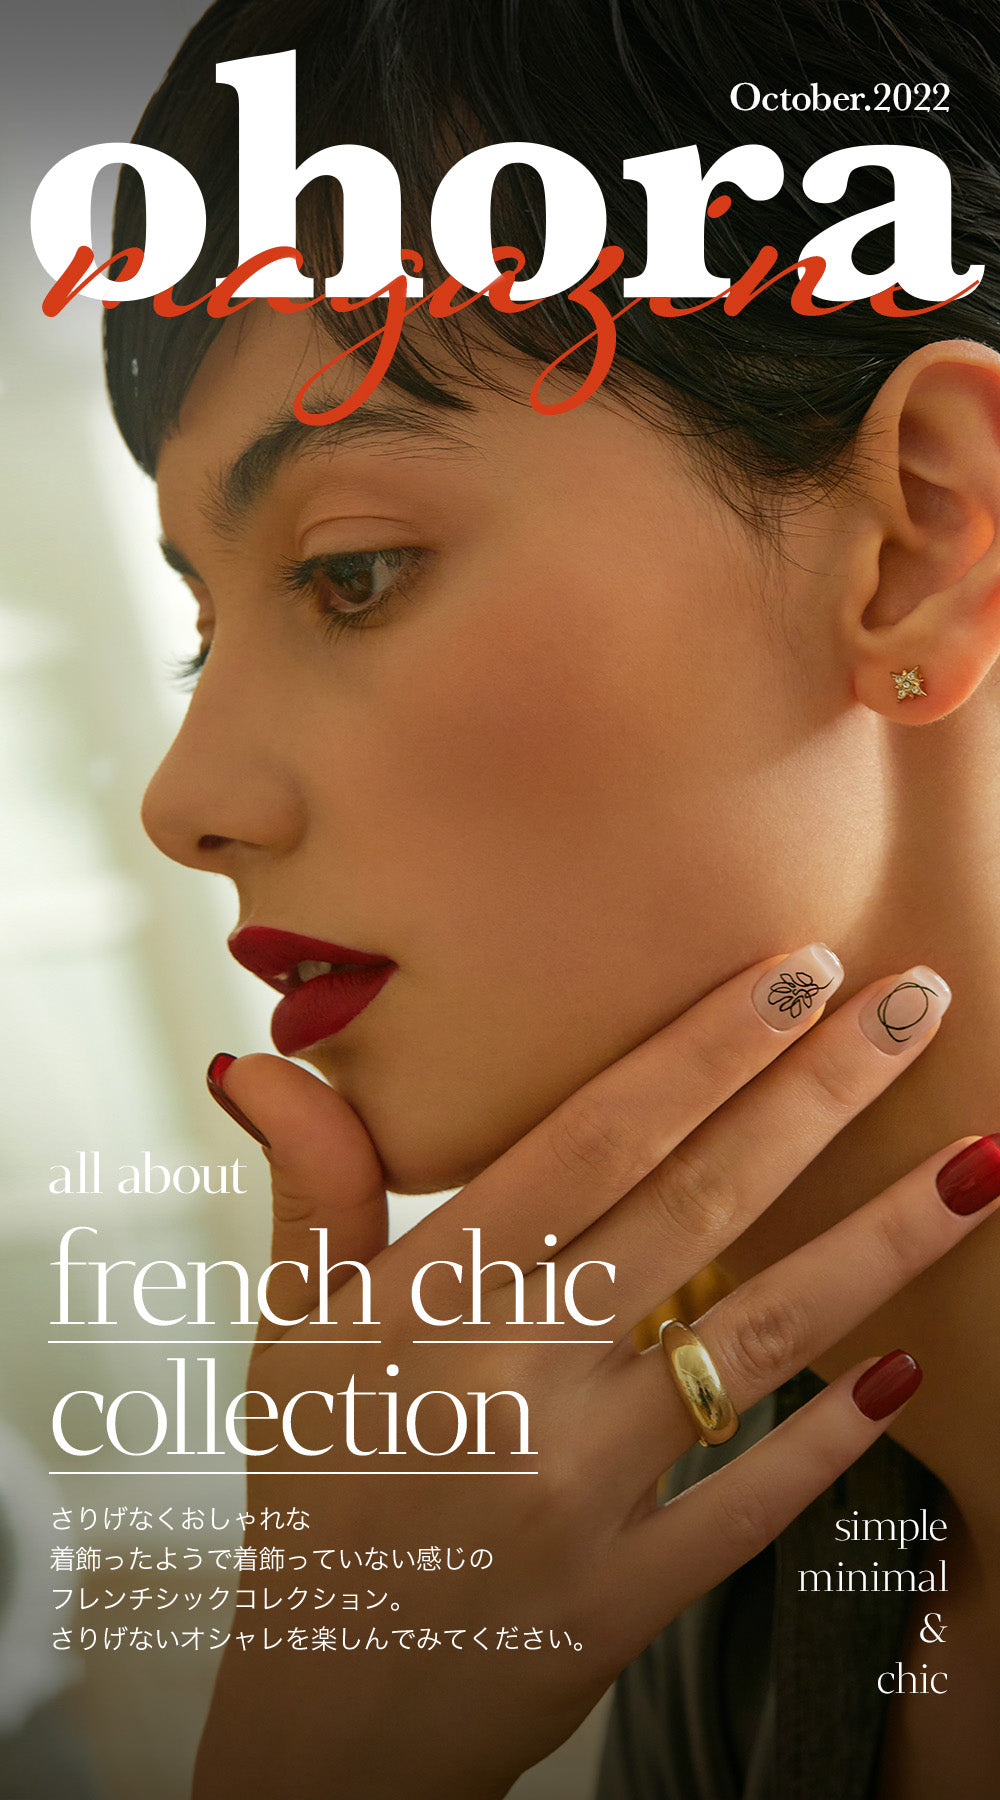 french chic collection